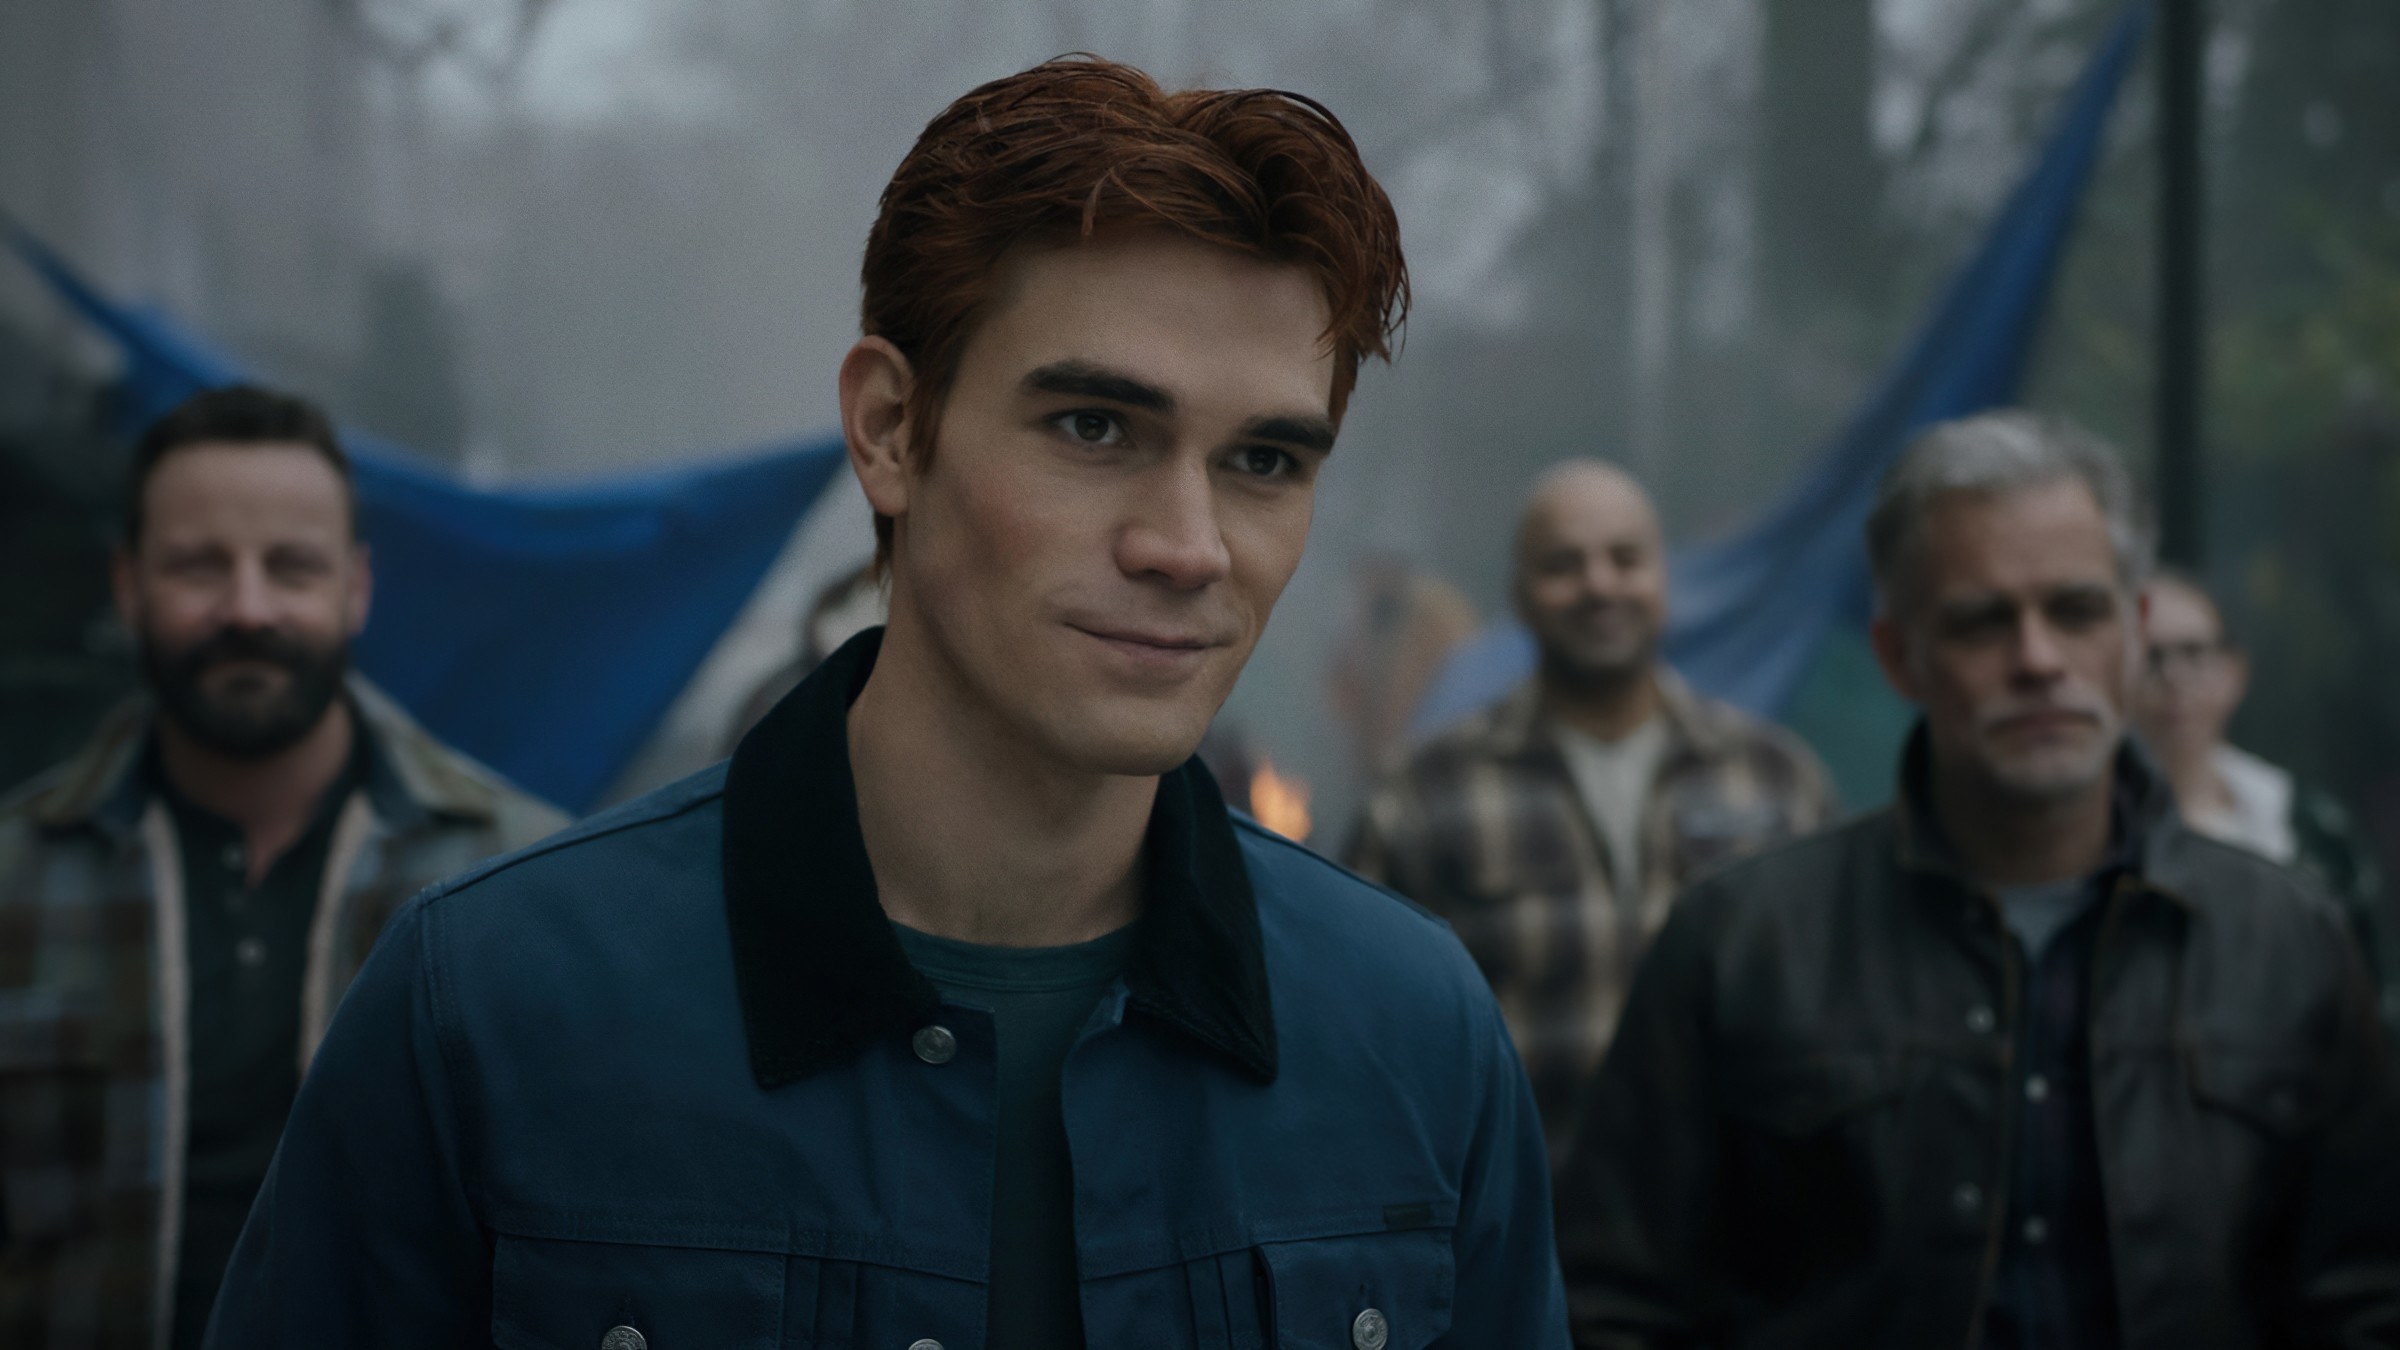 As Archie Andrews in Riverdale